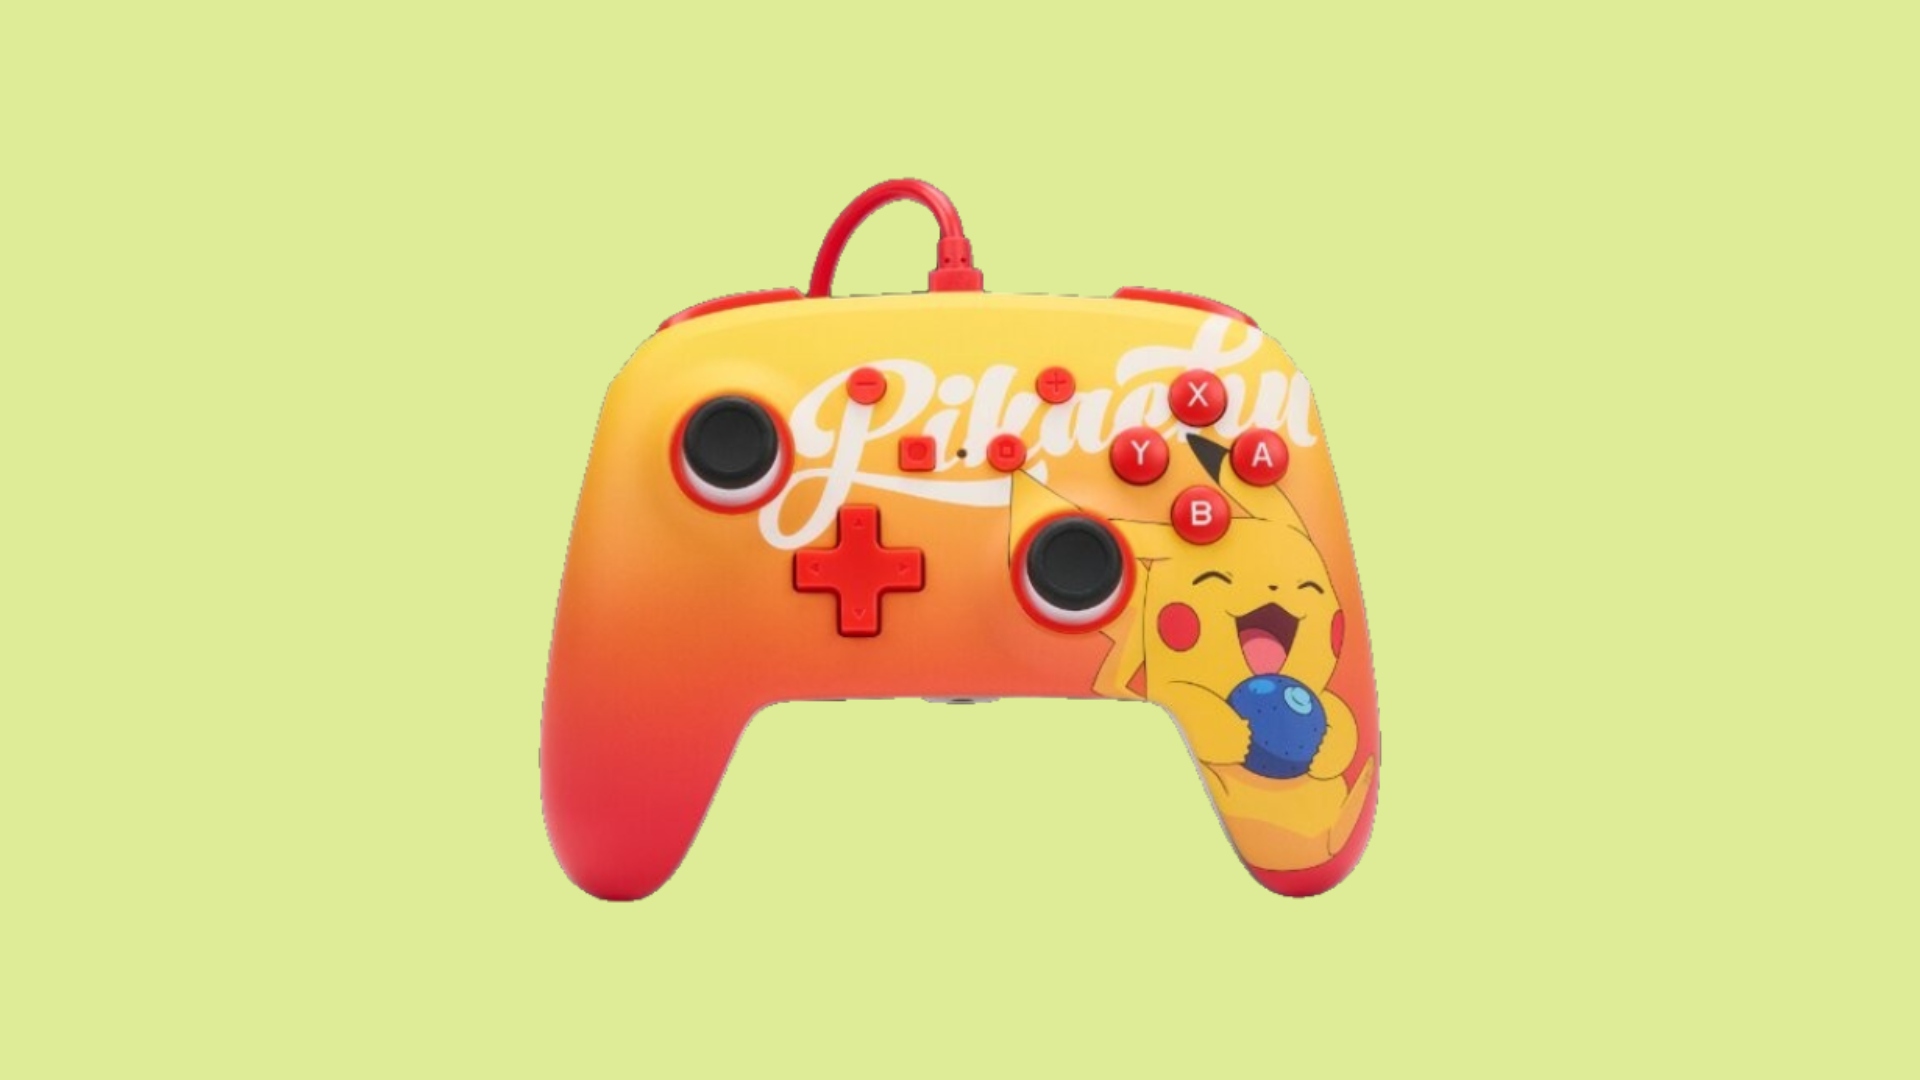 Best Nintendo Switch controllers: image shows a controller with a picture of a Pikachu eating an Oran berry.